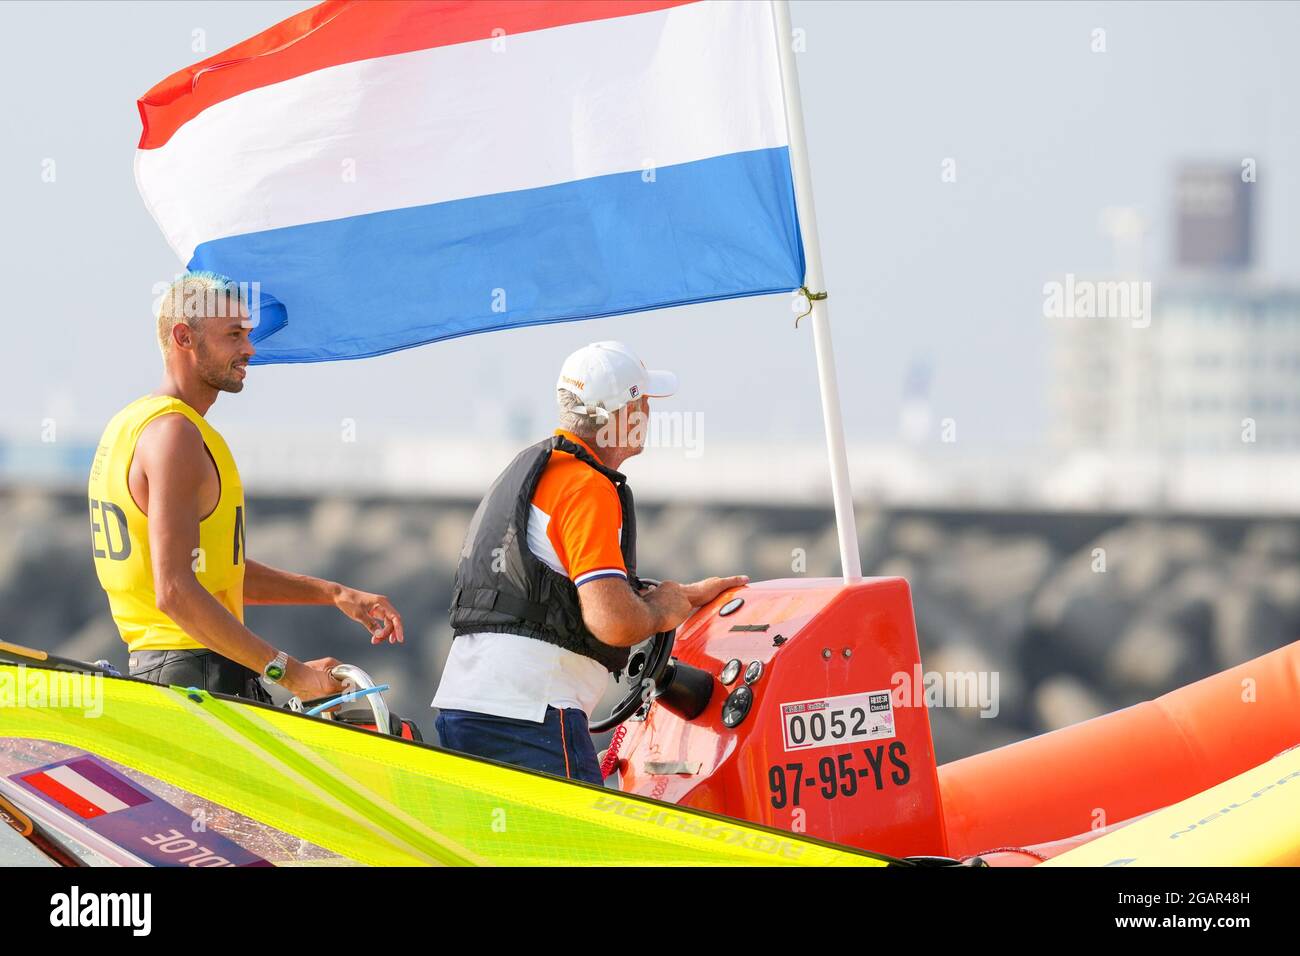 TOKYO, JAPAN - JULY 31: Kiran Badloe of the Netherlands celebrating his golden medal win competing on Men's Windsufer - RS:X during the Tokyo 2020 Olympic Games at the Sagami on July 31, 2021 in Tokyo, Japan (Photo by Ronald Hoogendoorn/Orange Pictures) NOCNSF Stock Photo